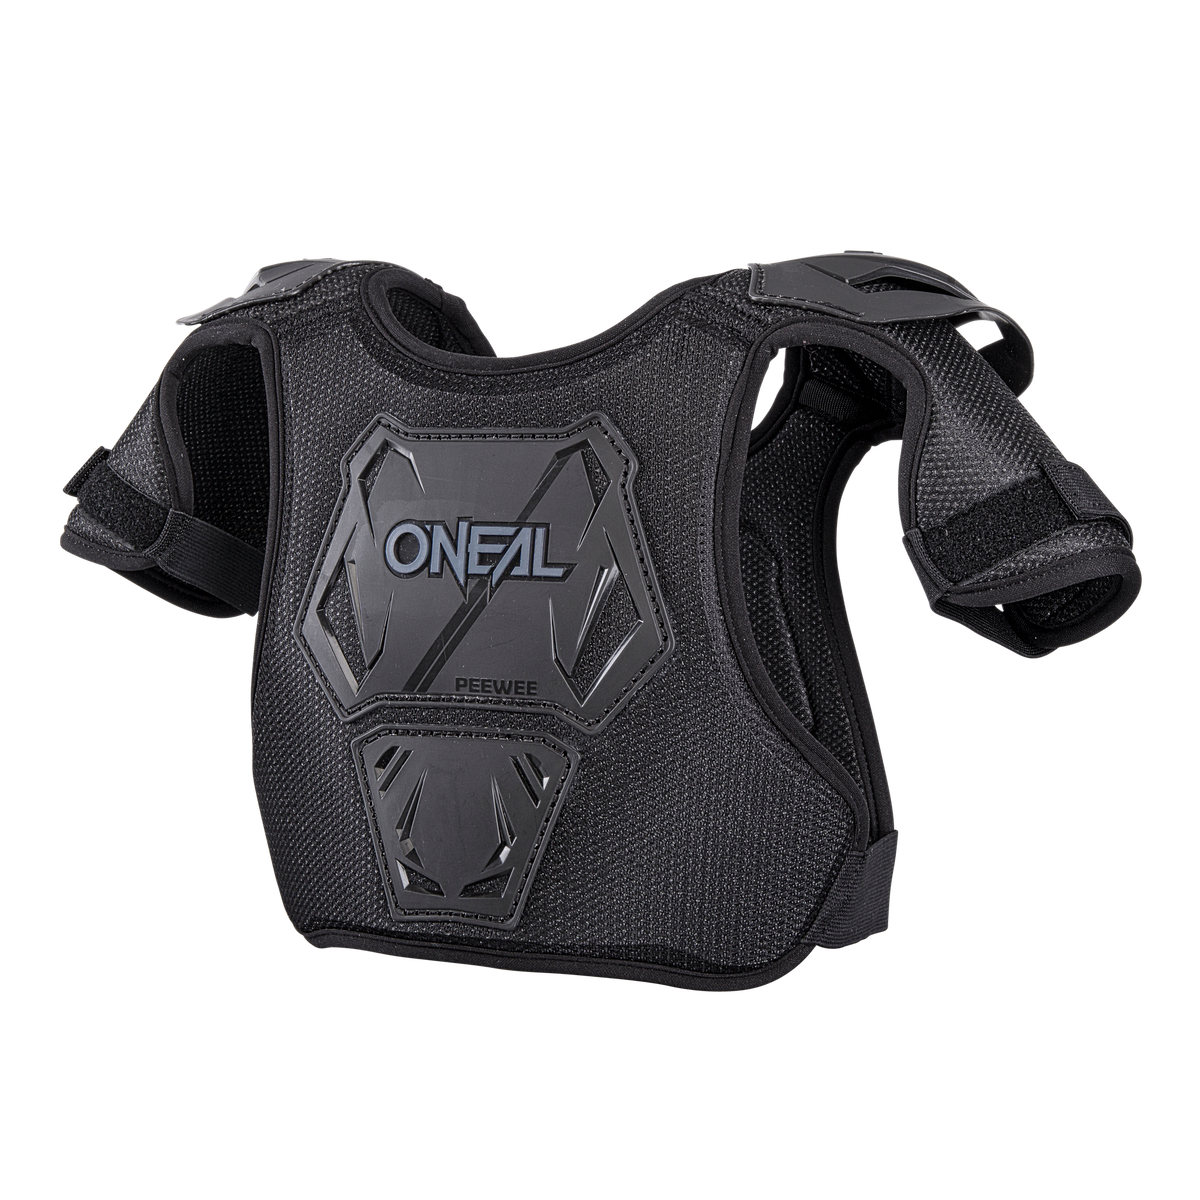 https://cdn.oneal.eu/assets/importedProductImages/PROTECTION/YOUTH/BODY%20ARMOUR/PEEWEE%20CHEST%20GUARD/black/2017_ONeal_PEEWEE_Chest_Guard_black_A2.png